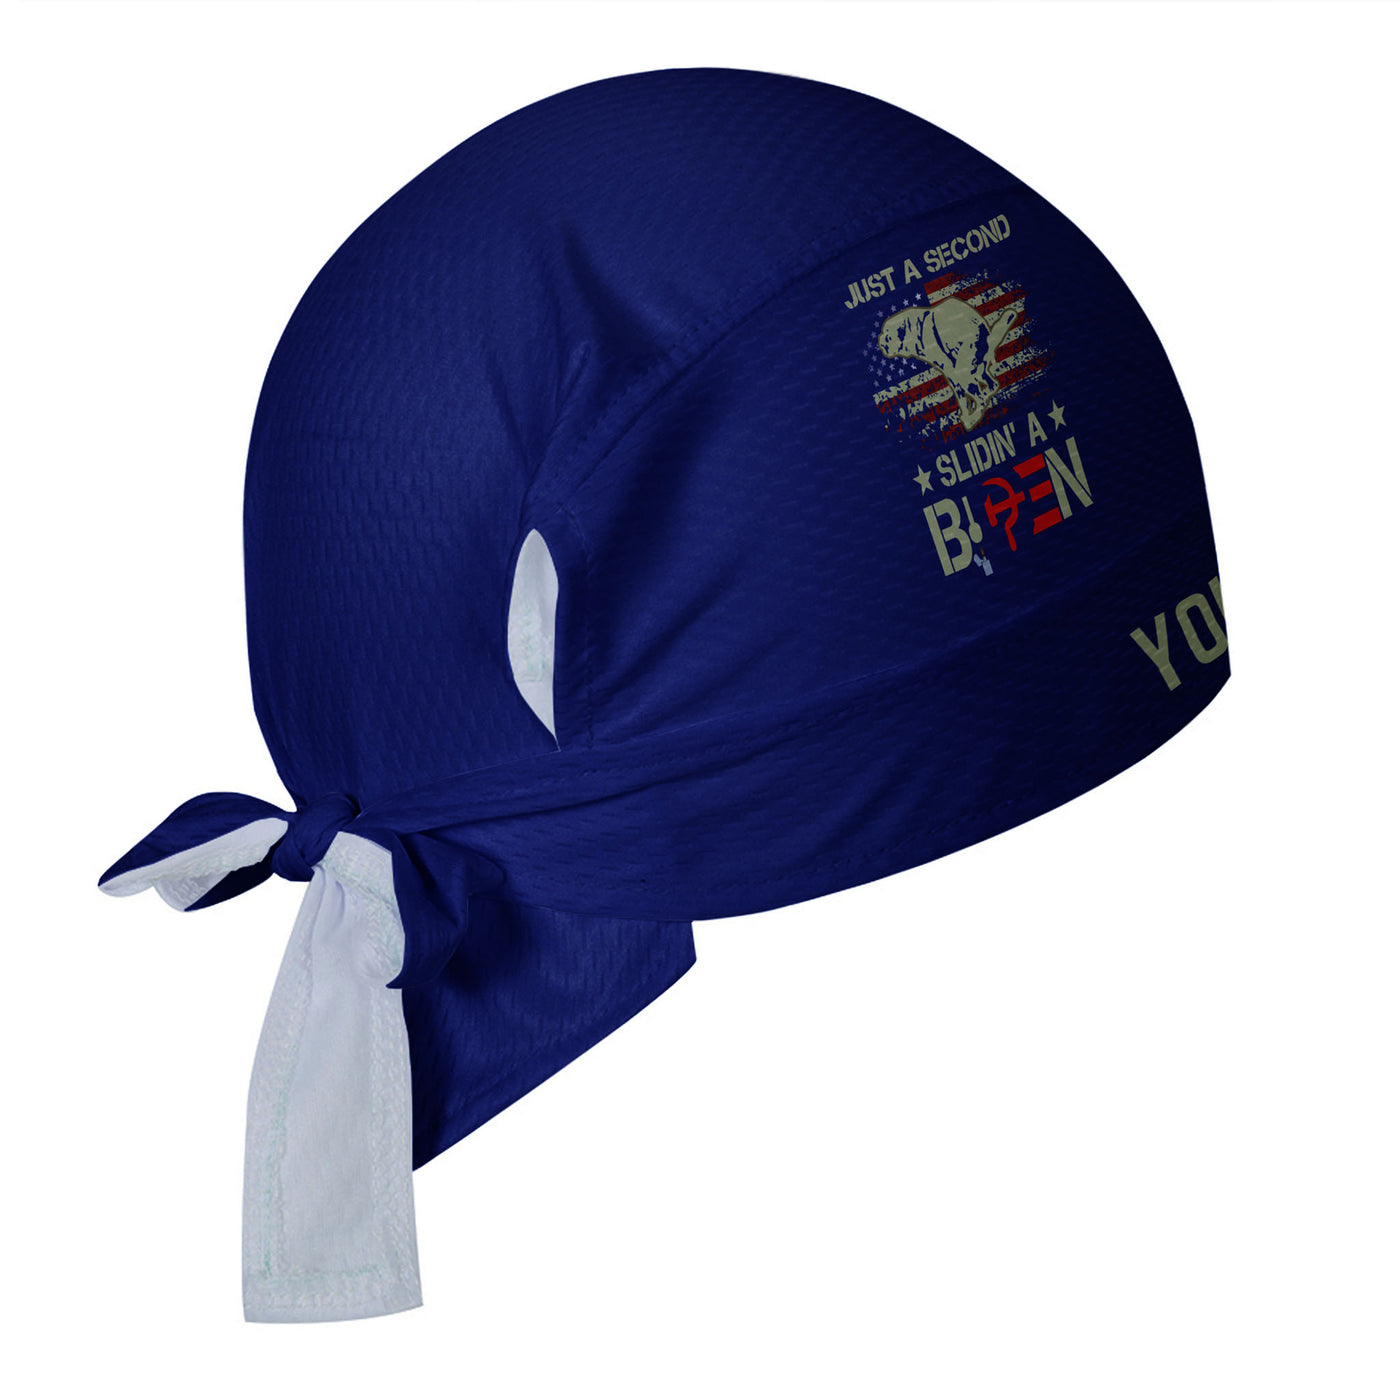 Customized Just A Second Slidin' A Biden Cycling Scarf Sports Hats